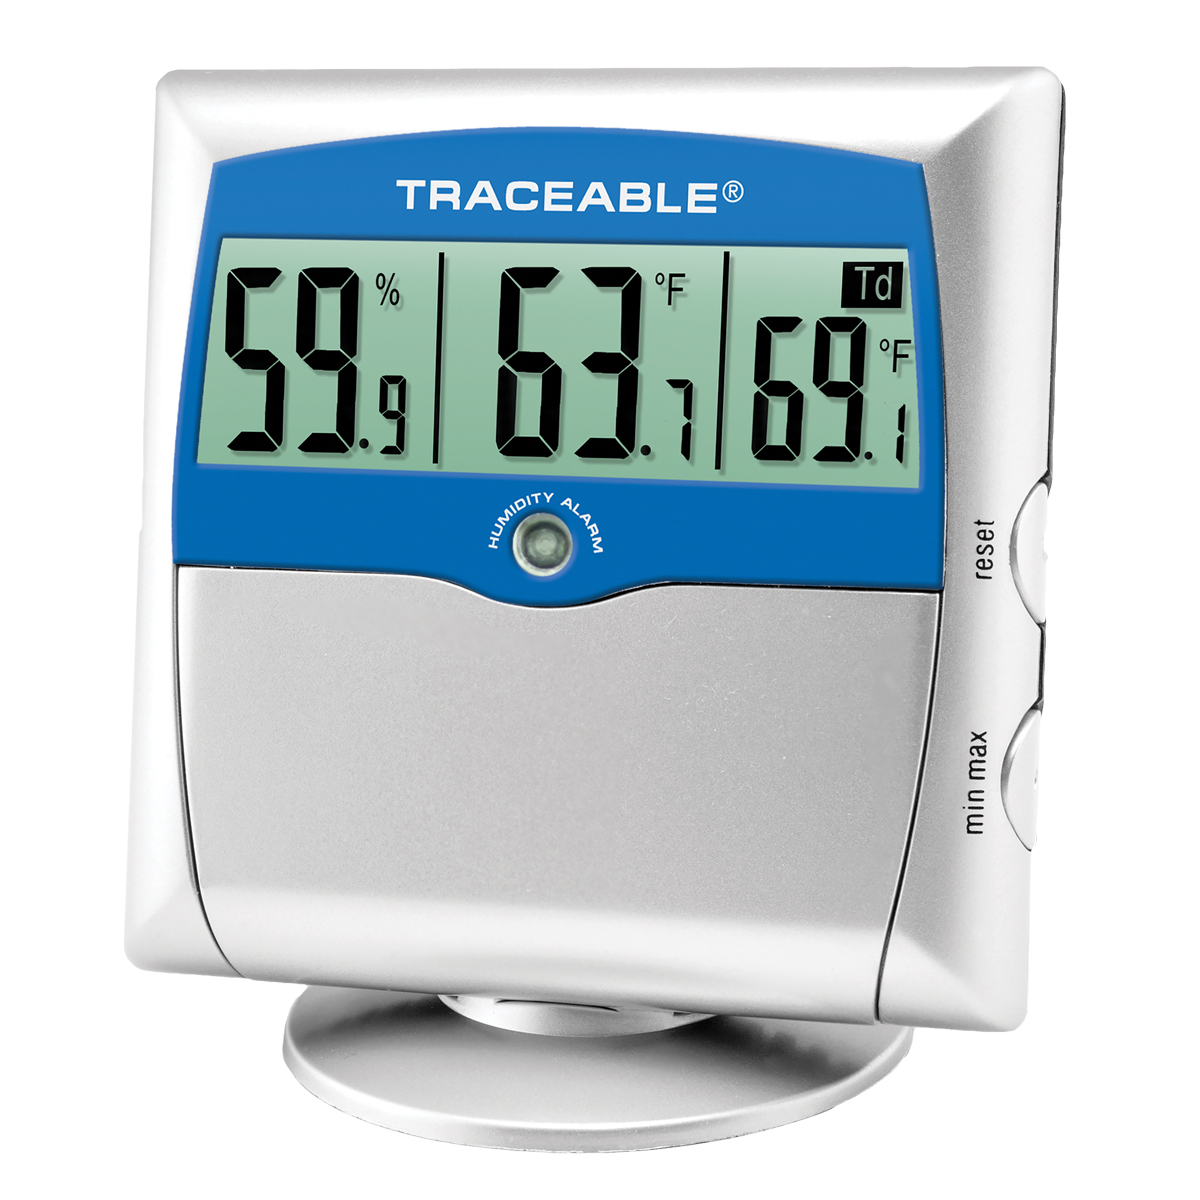 Traceable Time, Temperature, and Humidity Analog Wall Clock